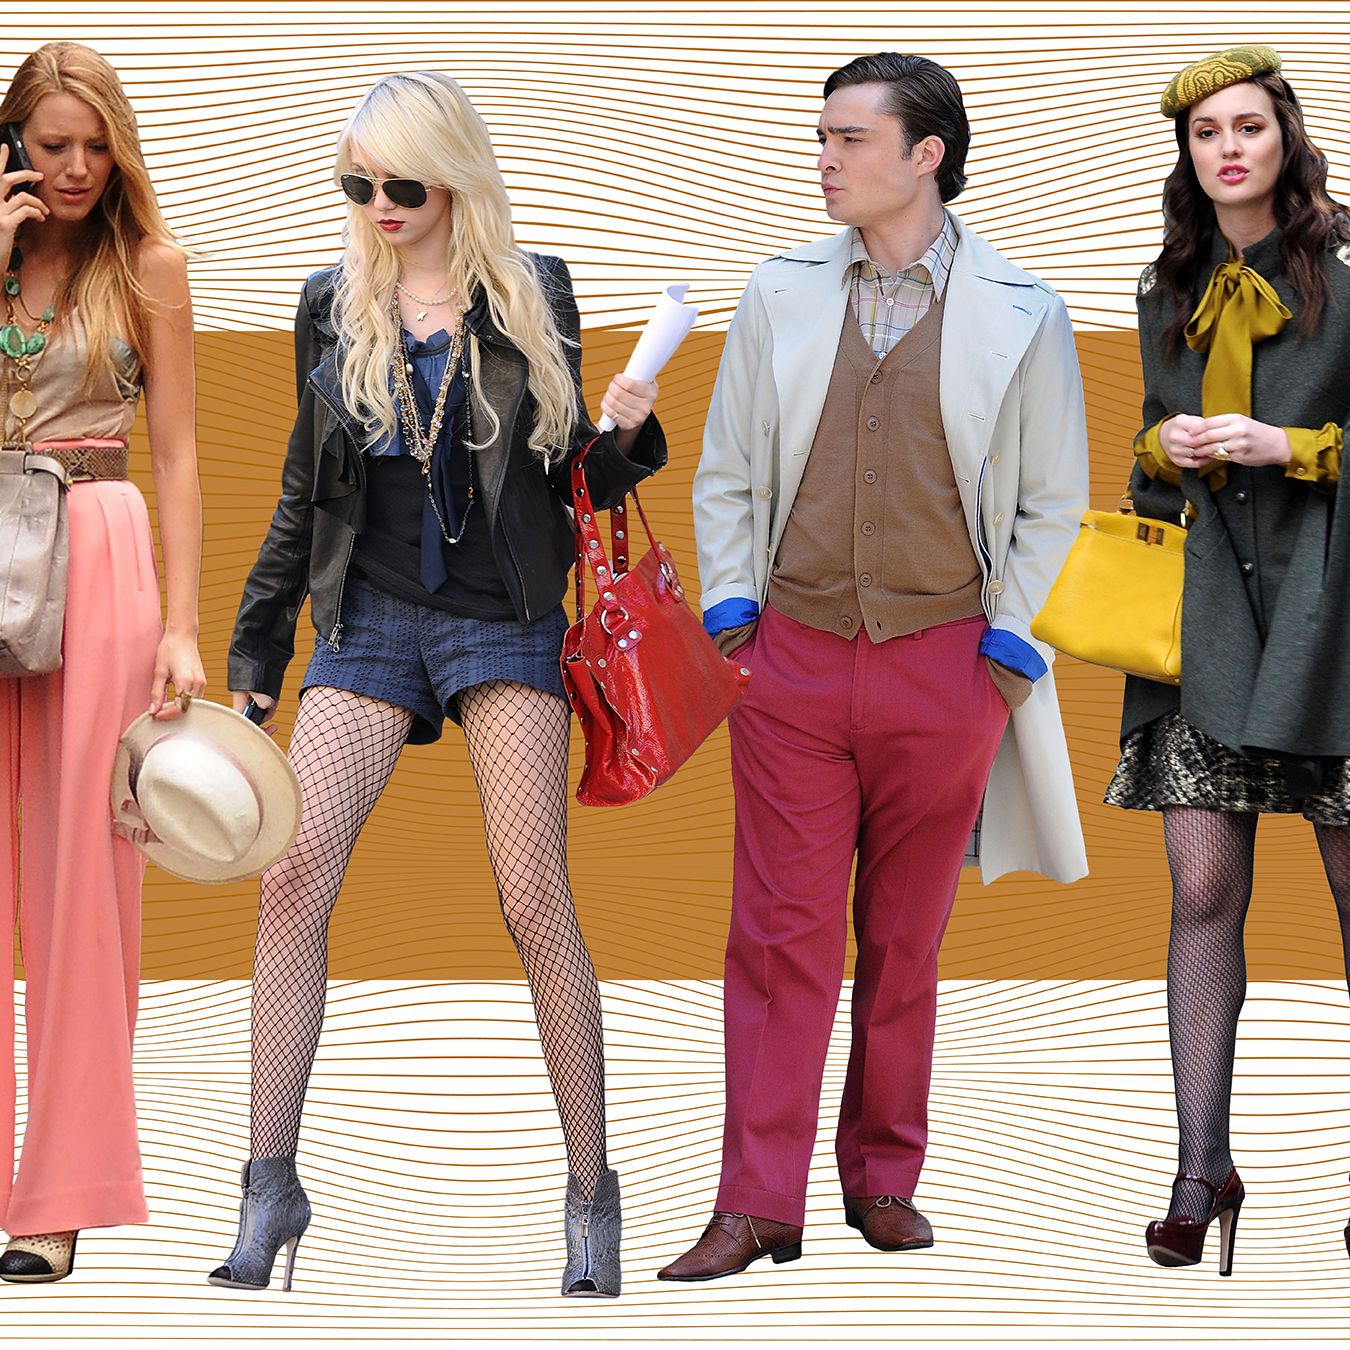 Chic & Classic Halloween Costumes Inspired by the Original Gossip Girl